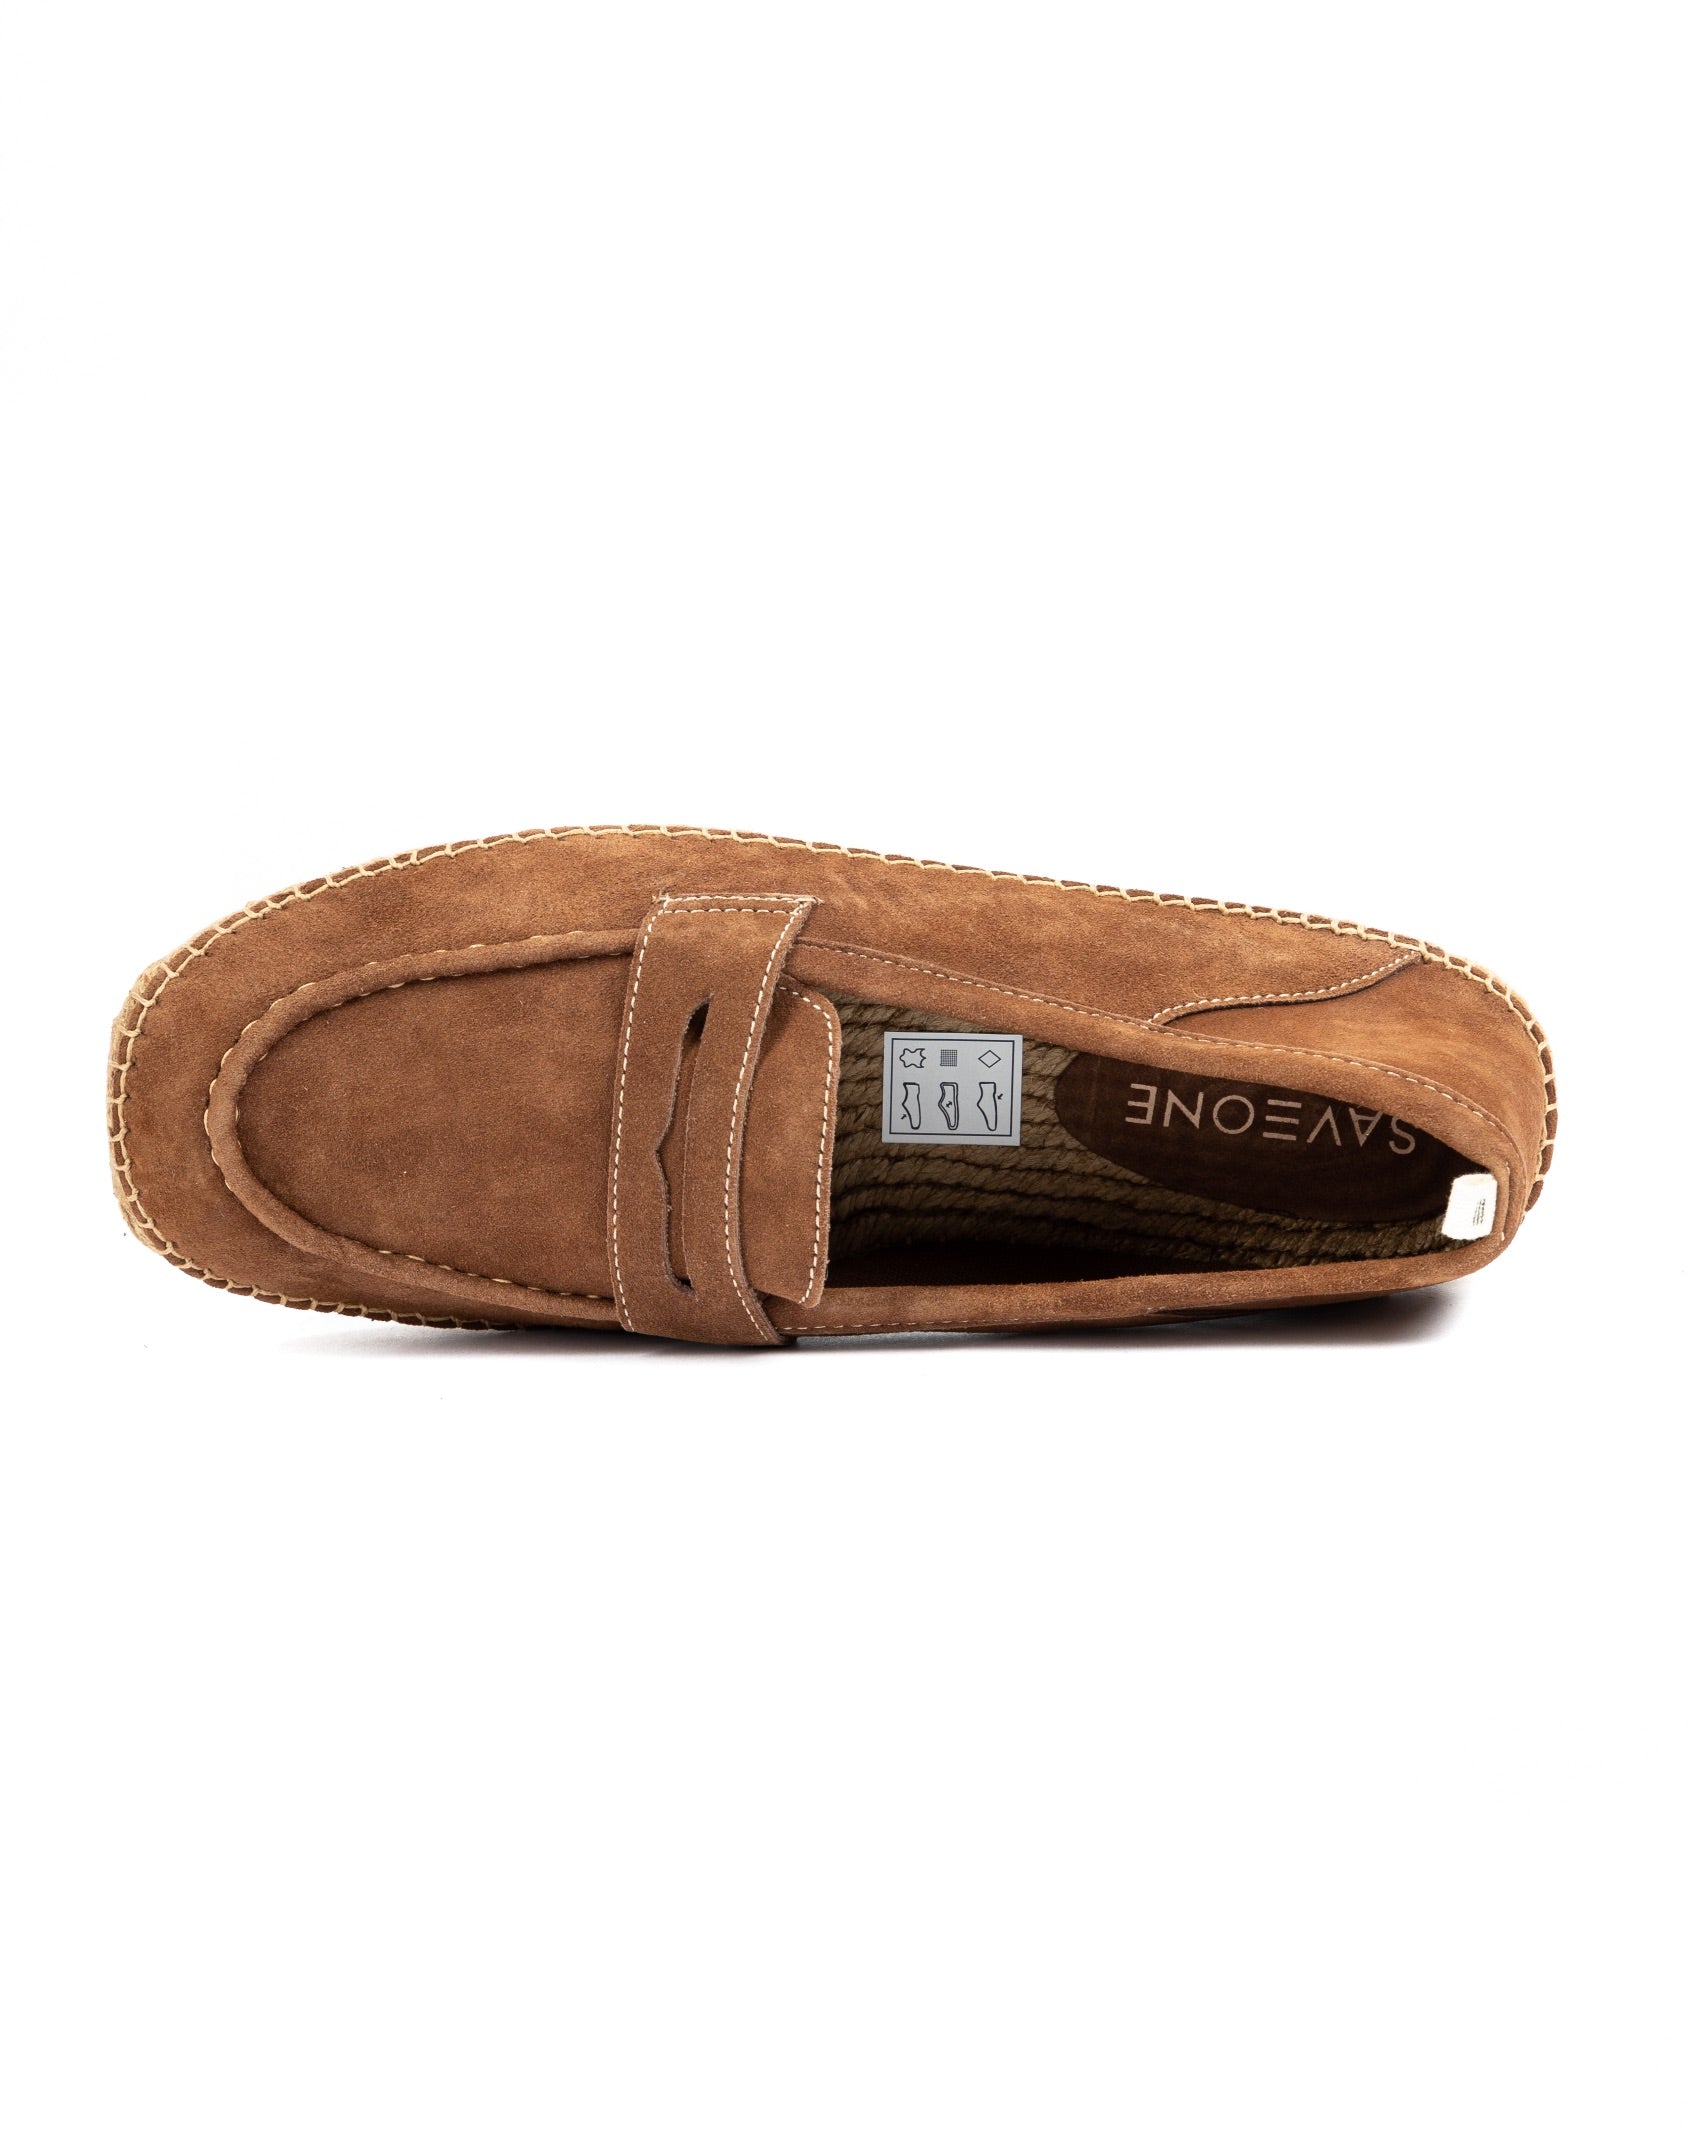 Roma - brown suede moccasin with rope sole